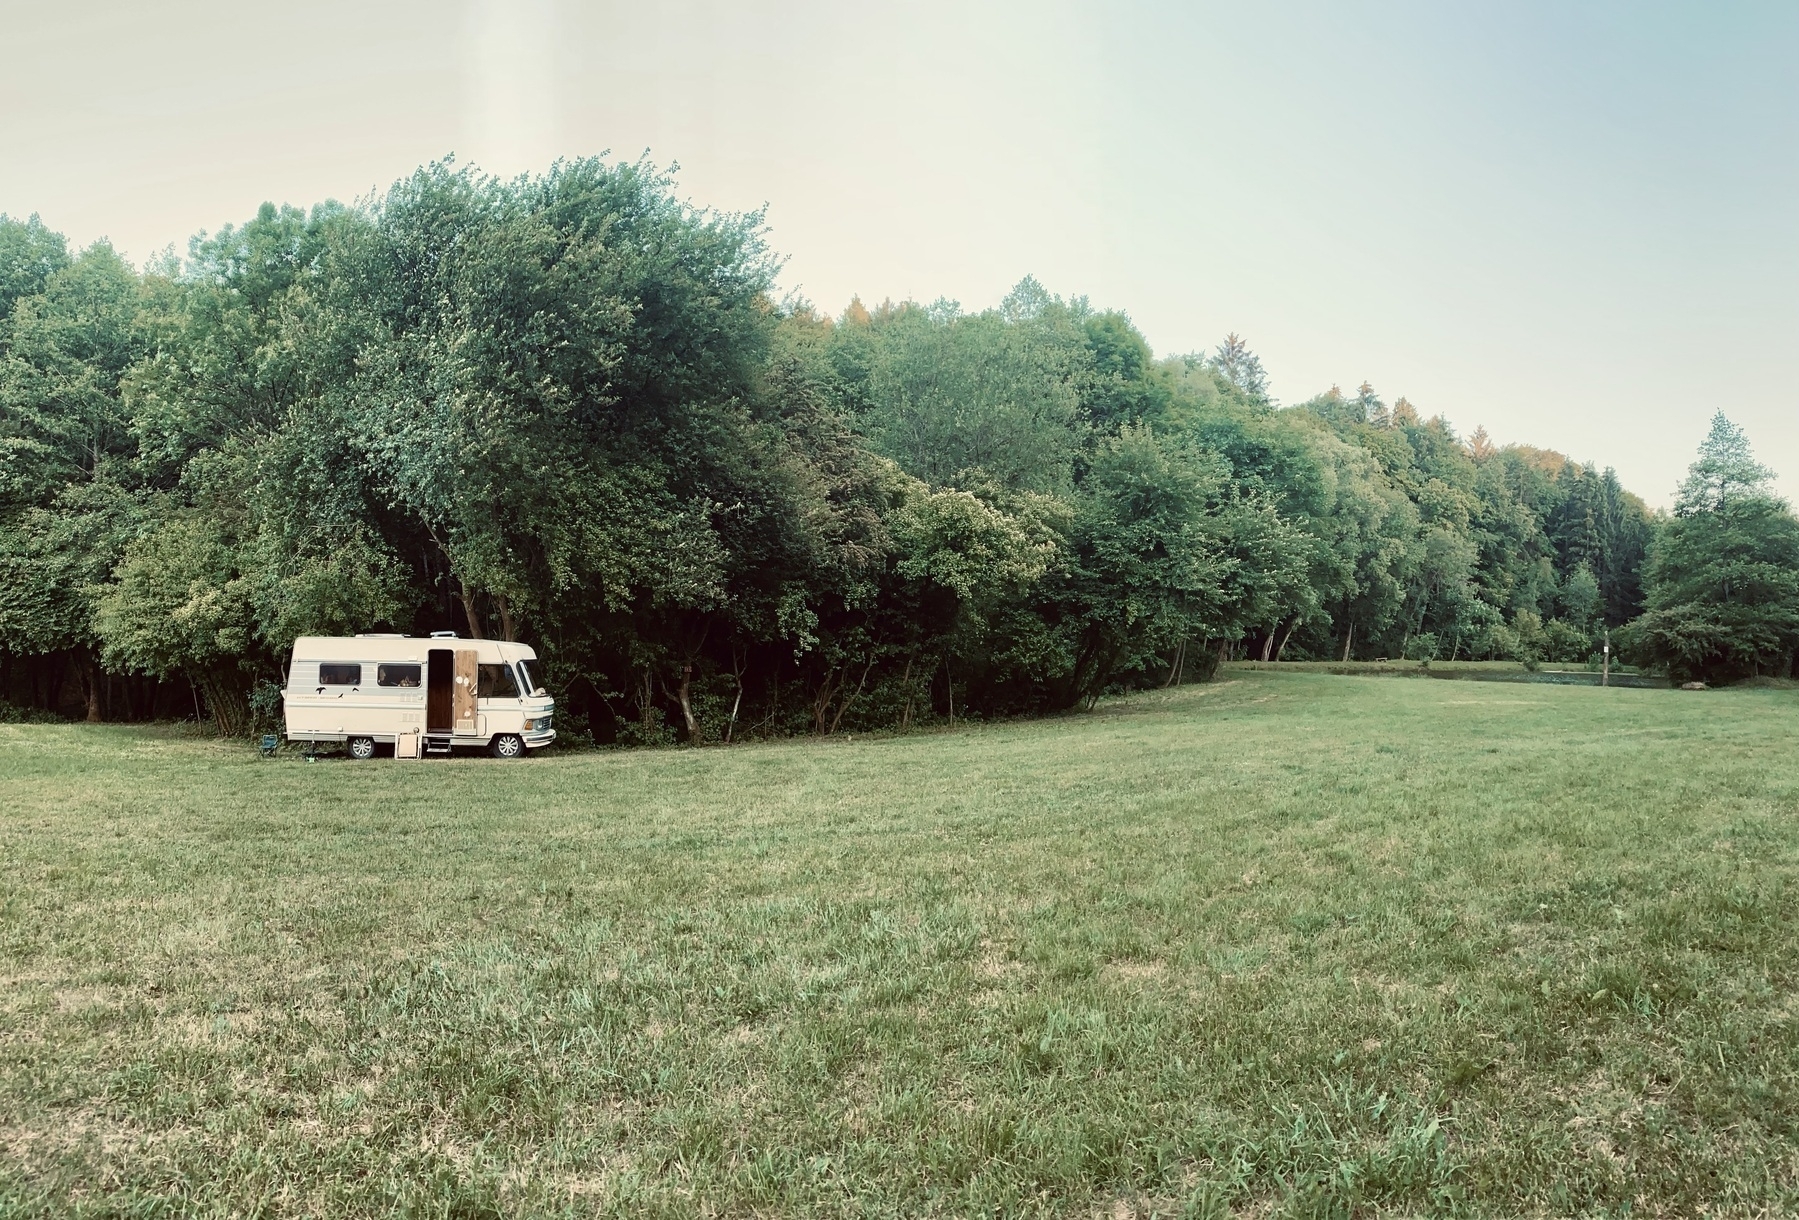 An old mobile home is parked in a meadow in front of a forest.&10;